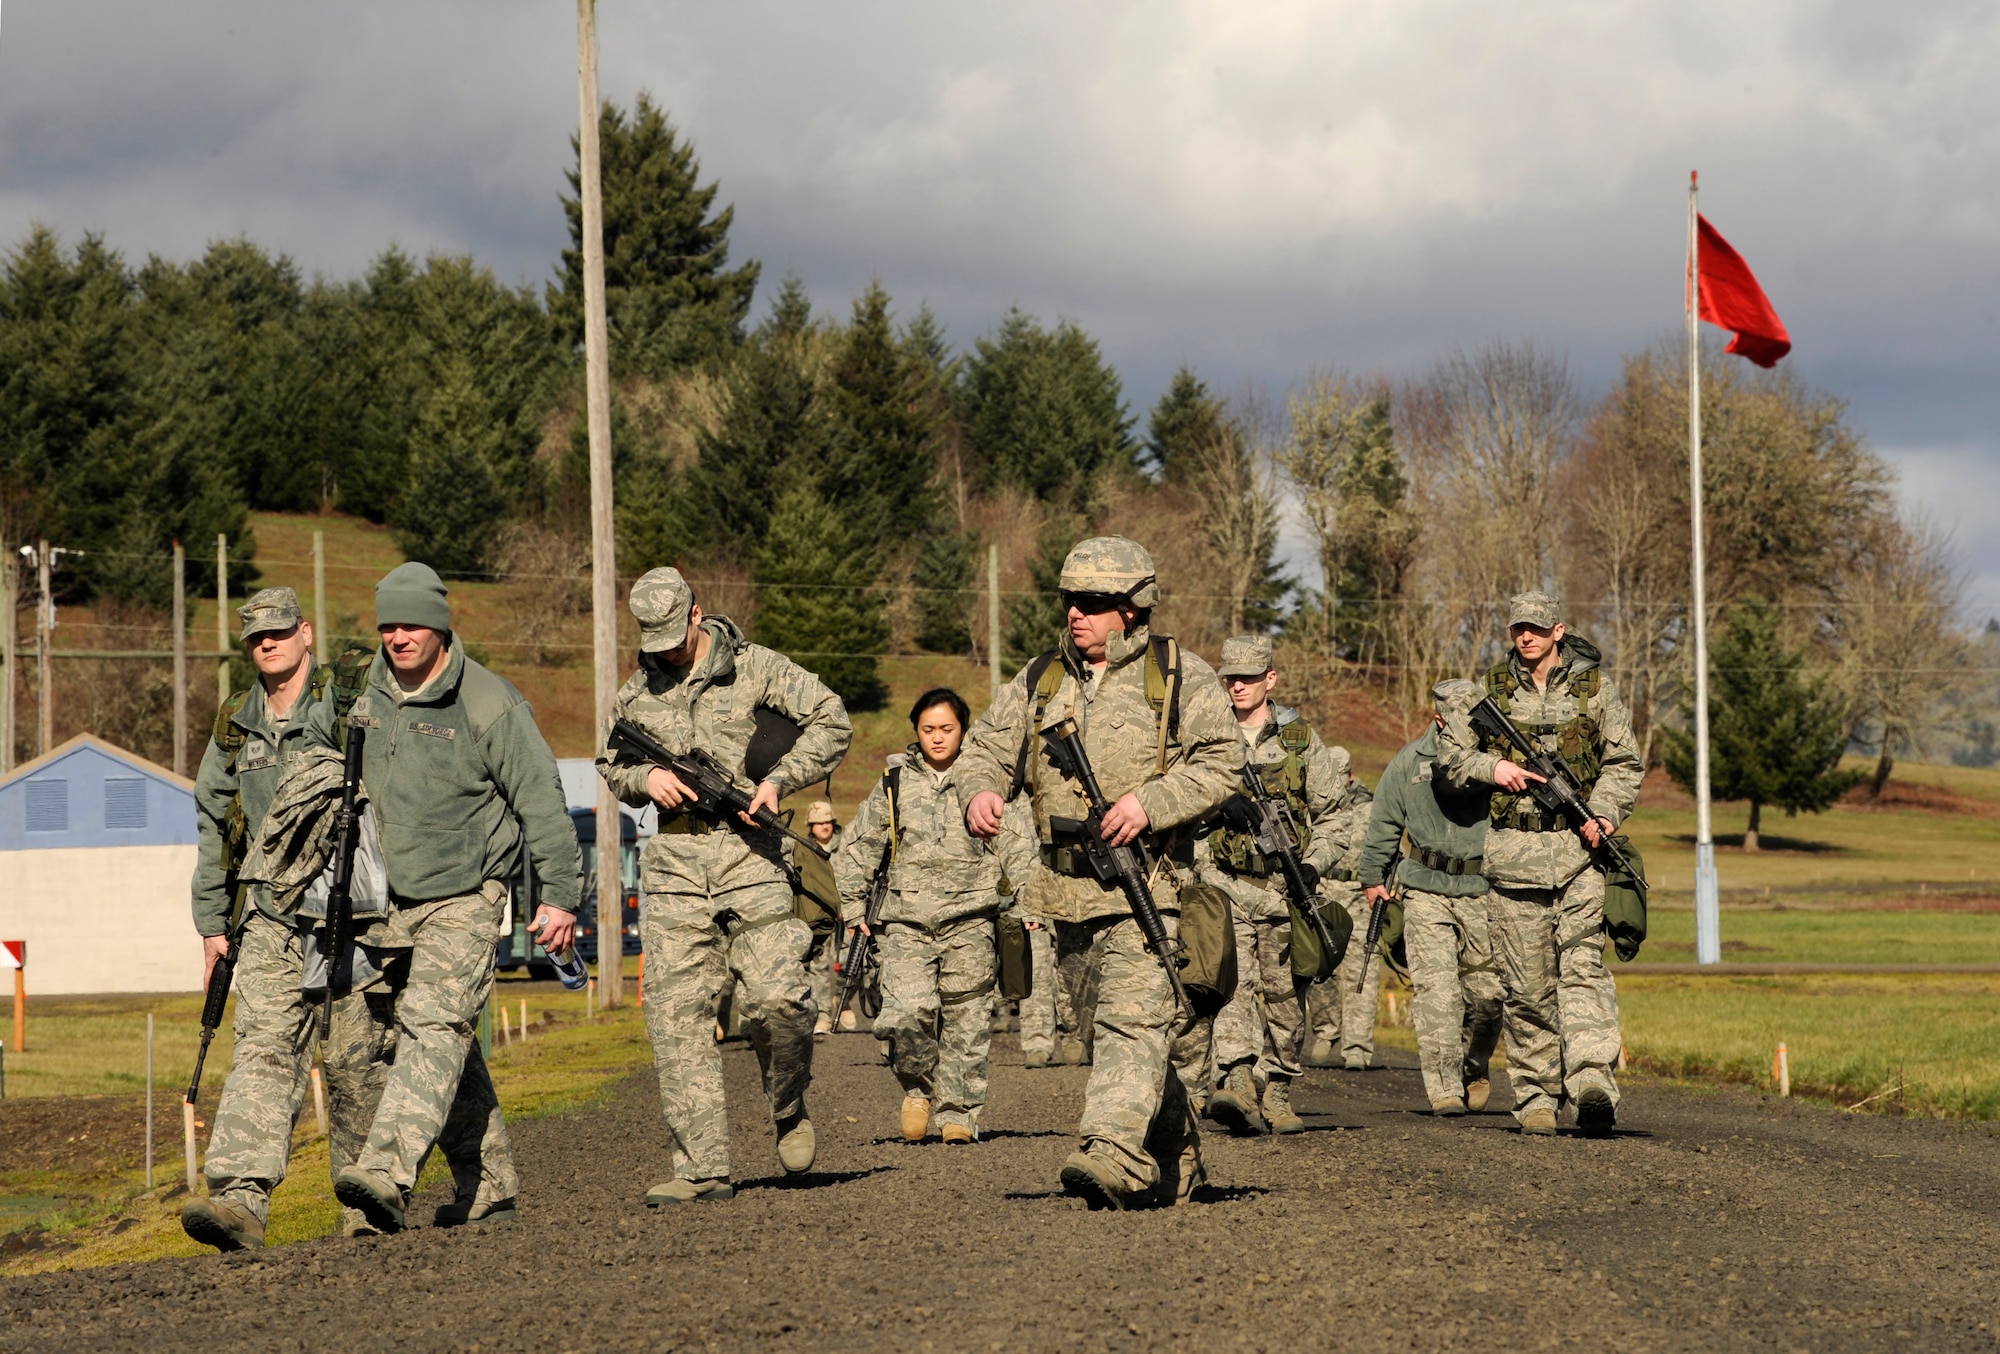 Airmen of the Oregon Air National Guard's 116th Air Control Squadron arrive at Camp Adair, Ore., for weapons training on February 17, 2011. Over 80 members of the 116th ACS will depart in March of 2011 to the Middle East to support Operation Enduring Freedom. (U.S. Air Force photograph by Tech. Sgt. John Hughel, 142nd Fighter Wing Public Affairs)